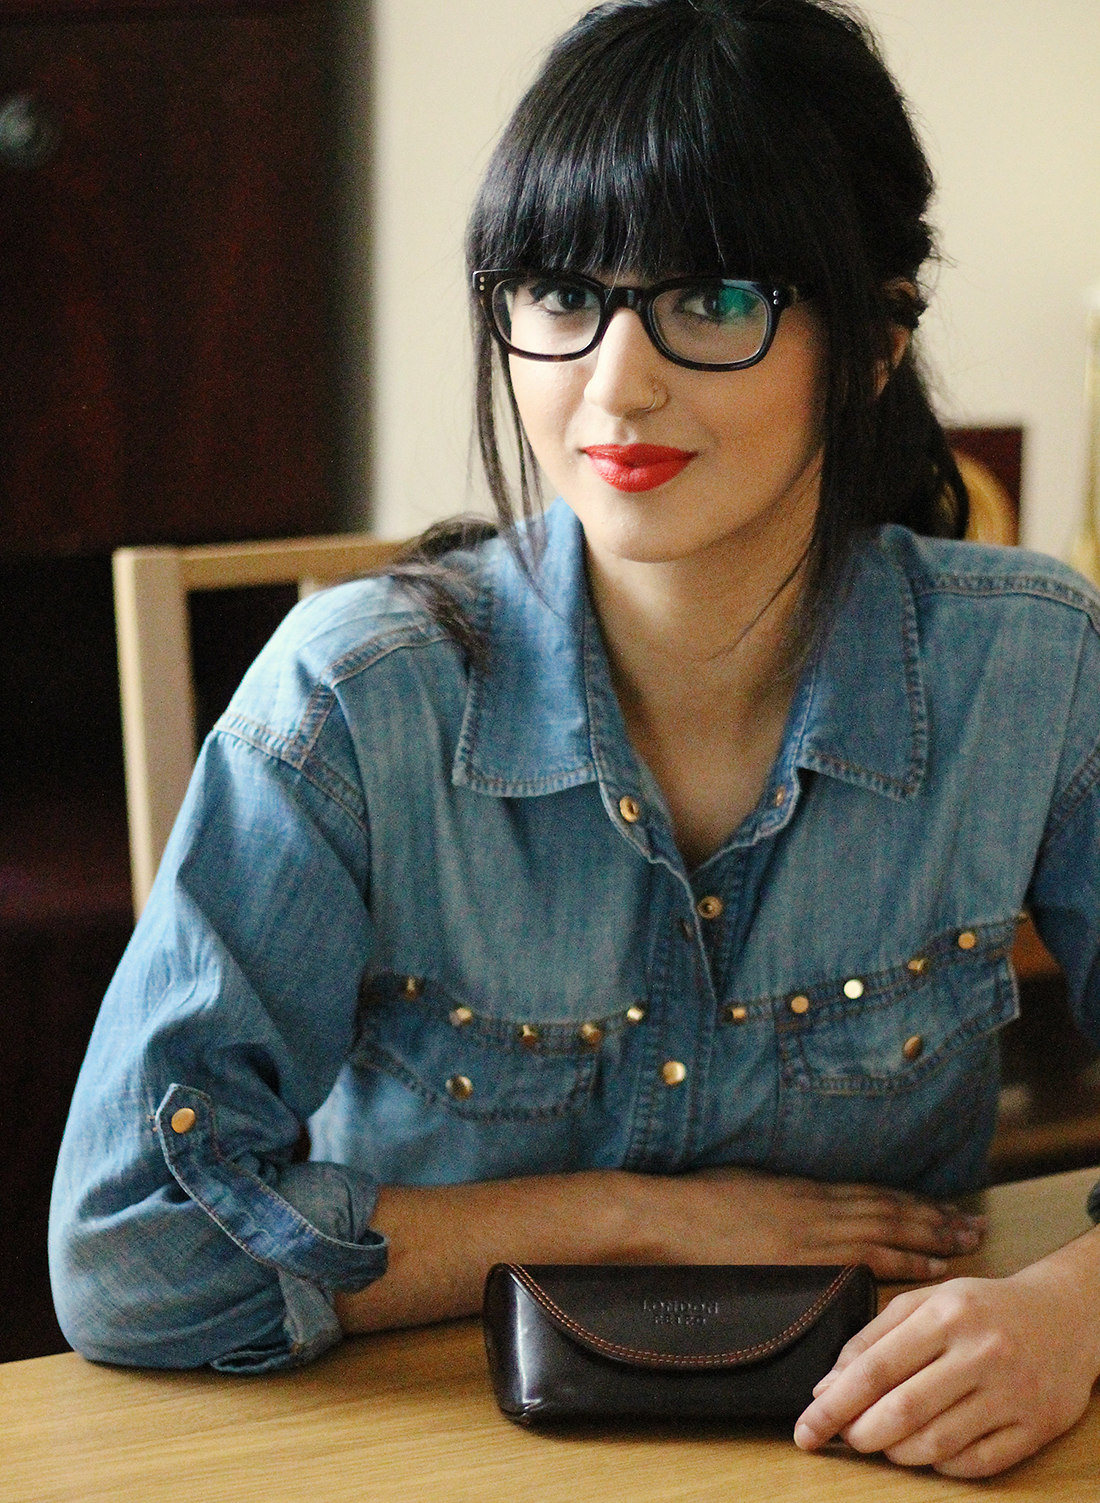 24 Easy To Do Hairstyles With Bangs And Glasses Hairstyles For Women